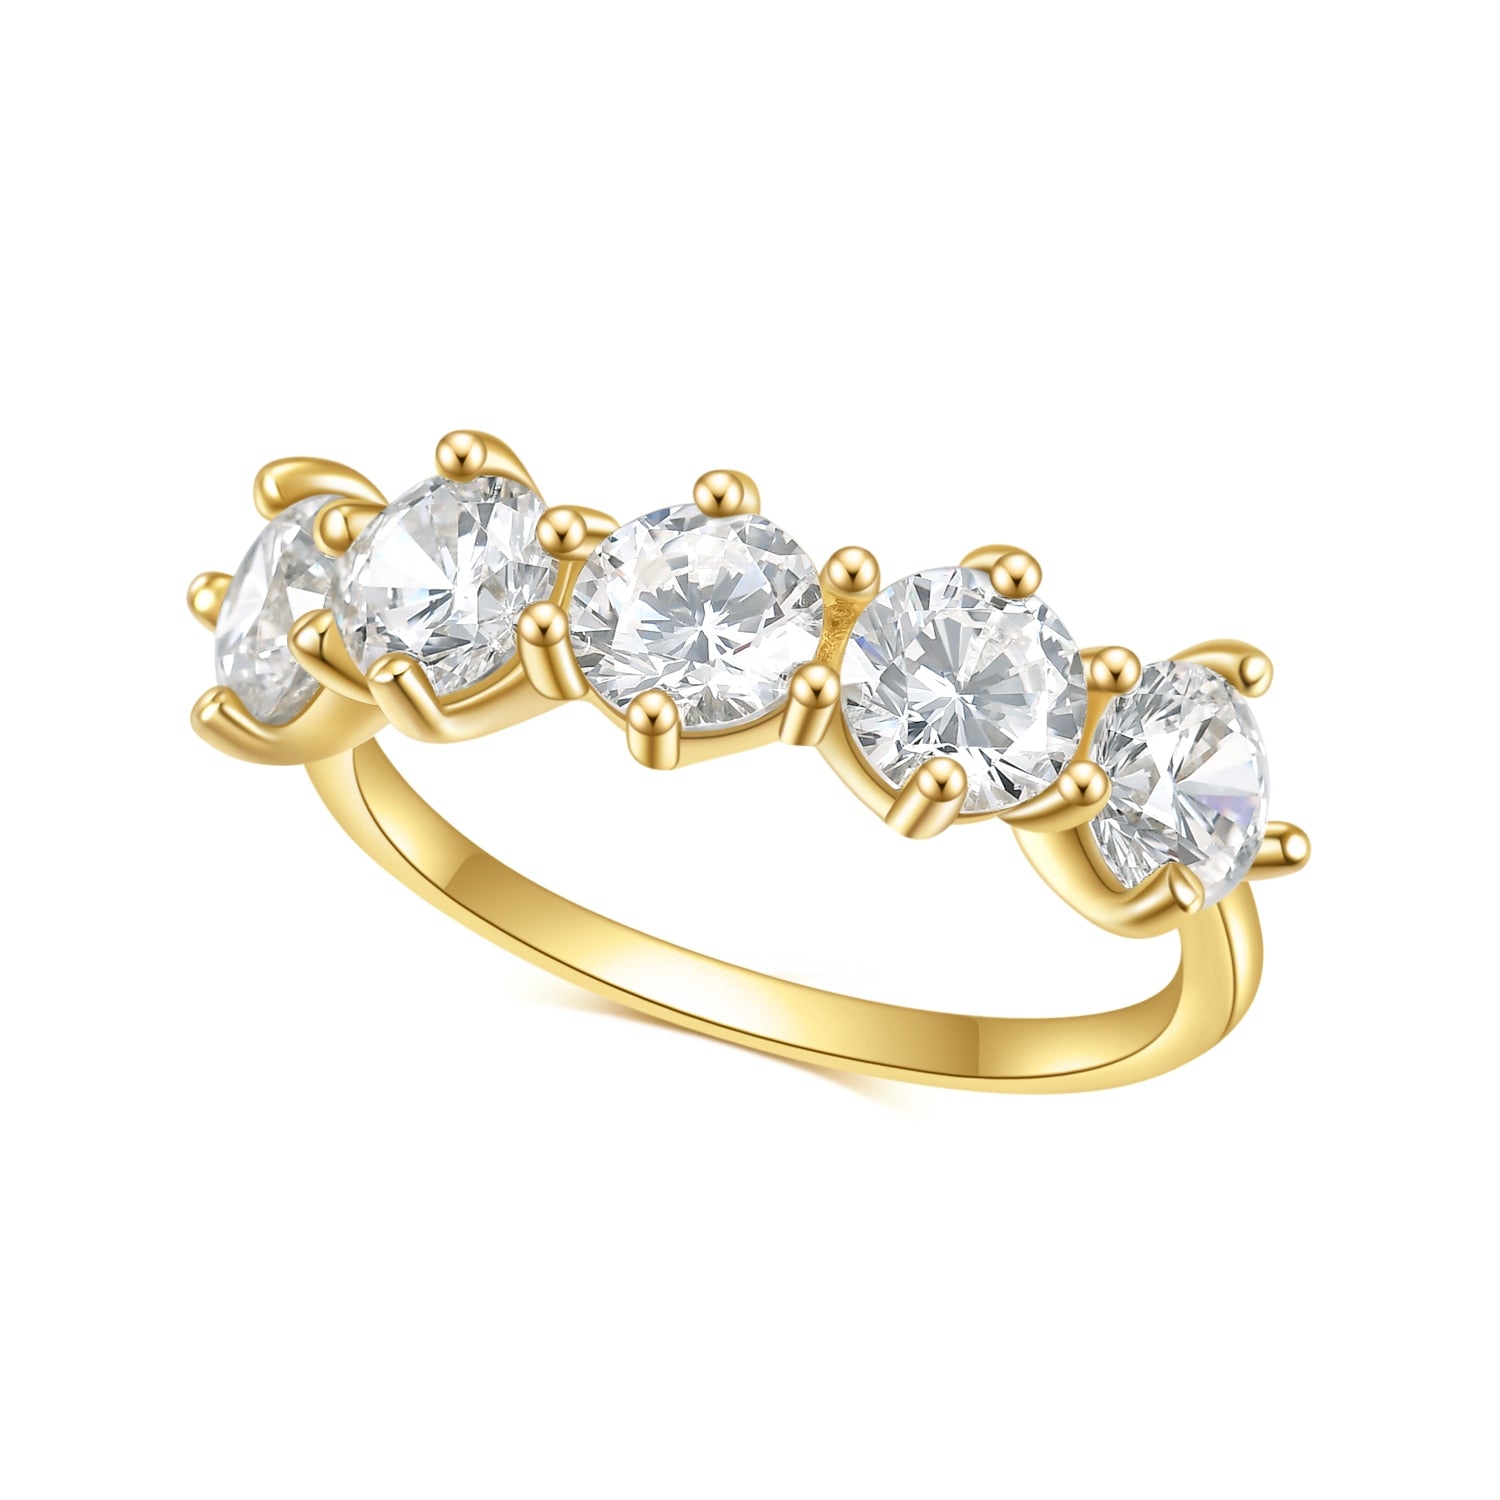 A gold ring with 5 half carat round moissanites set horizontally on the band.